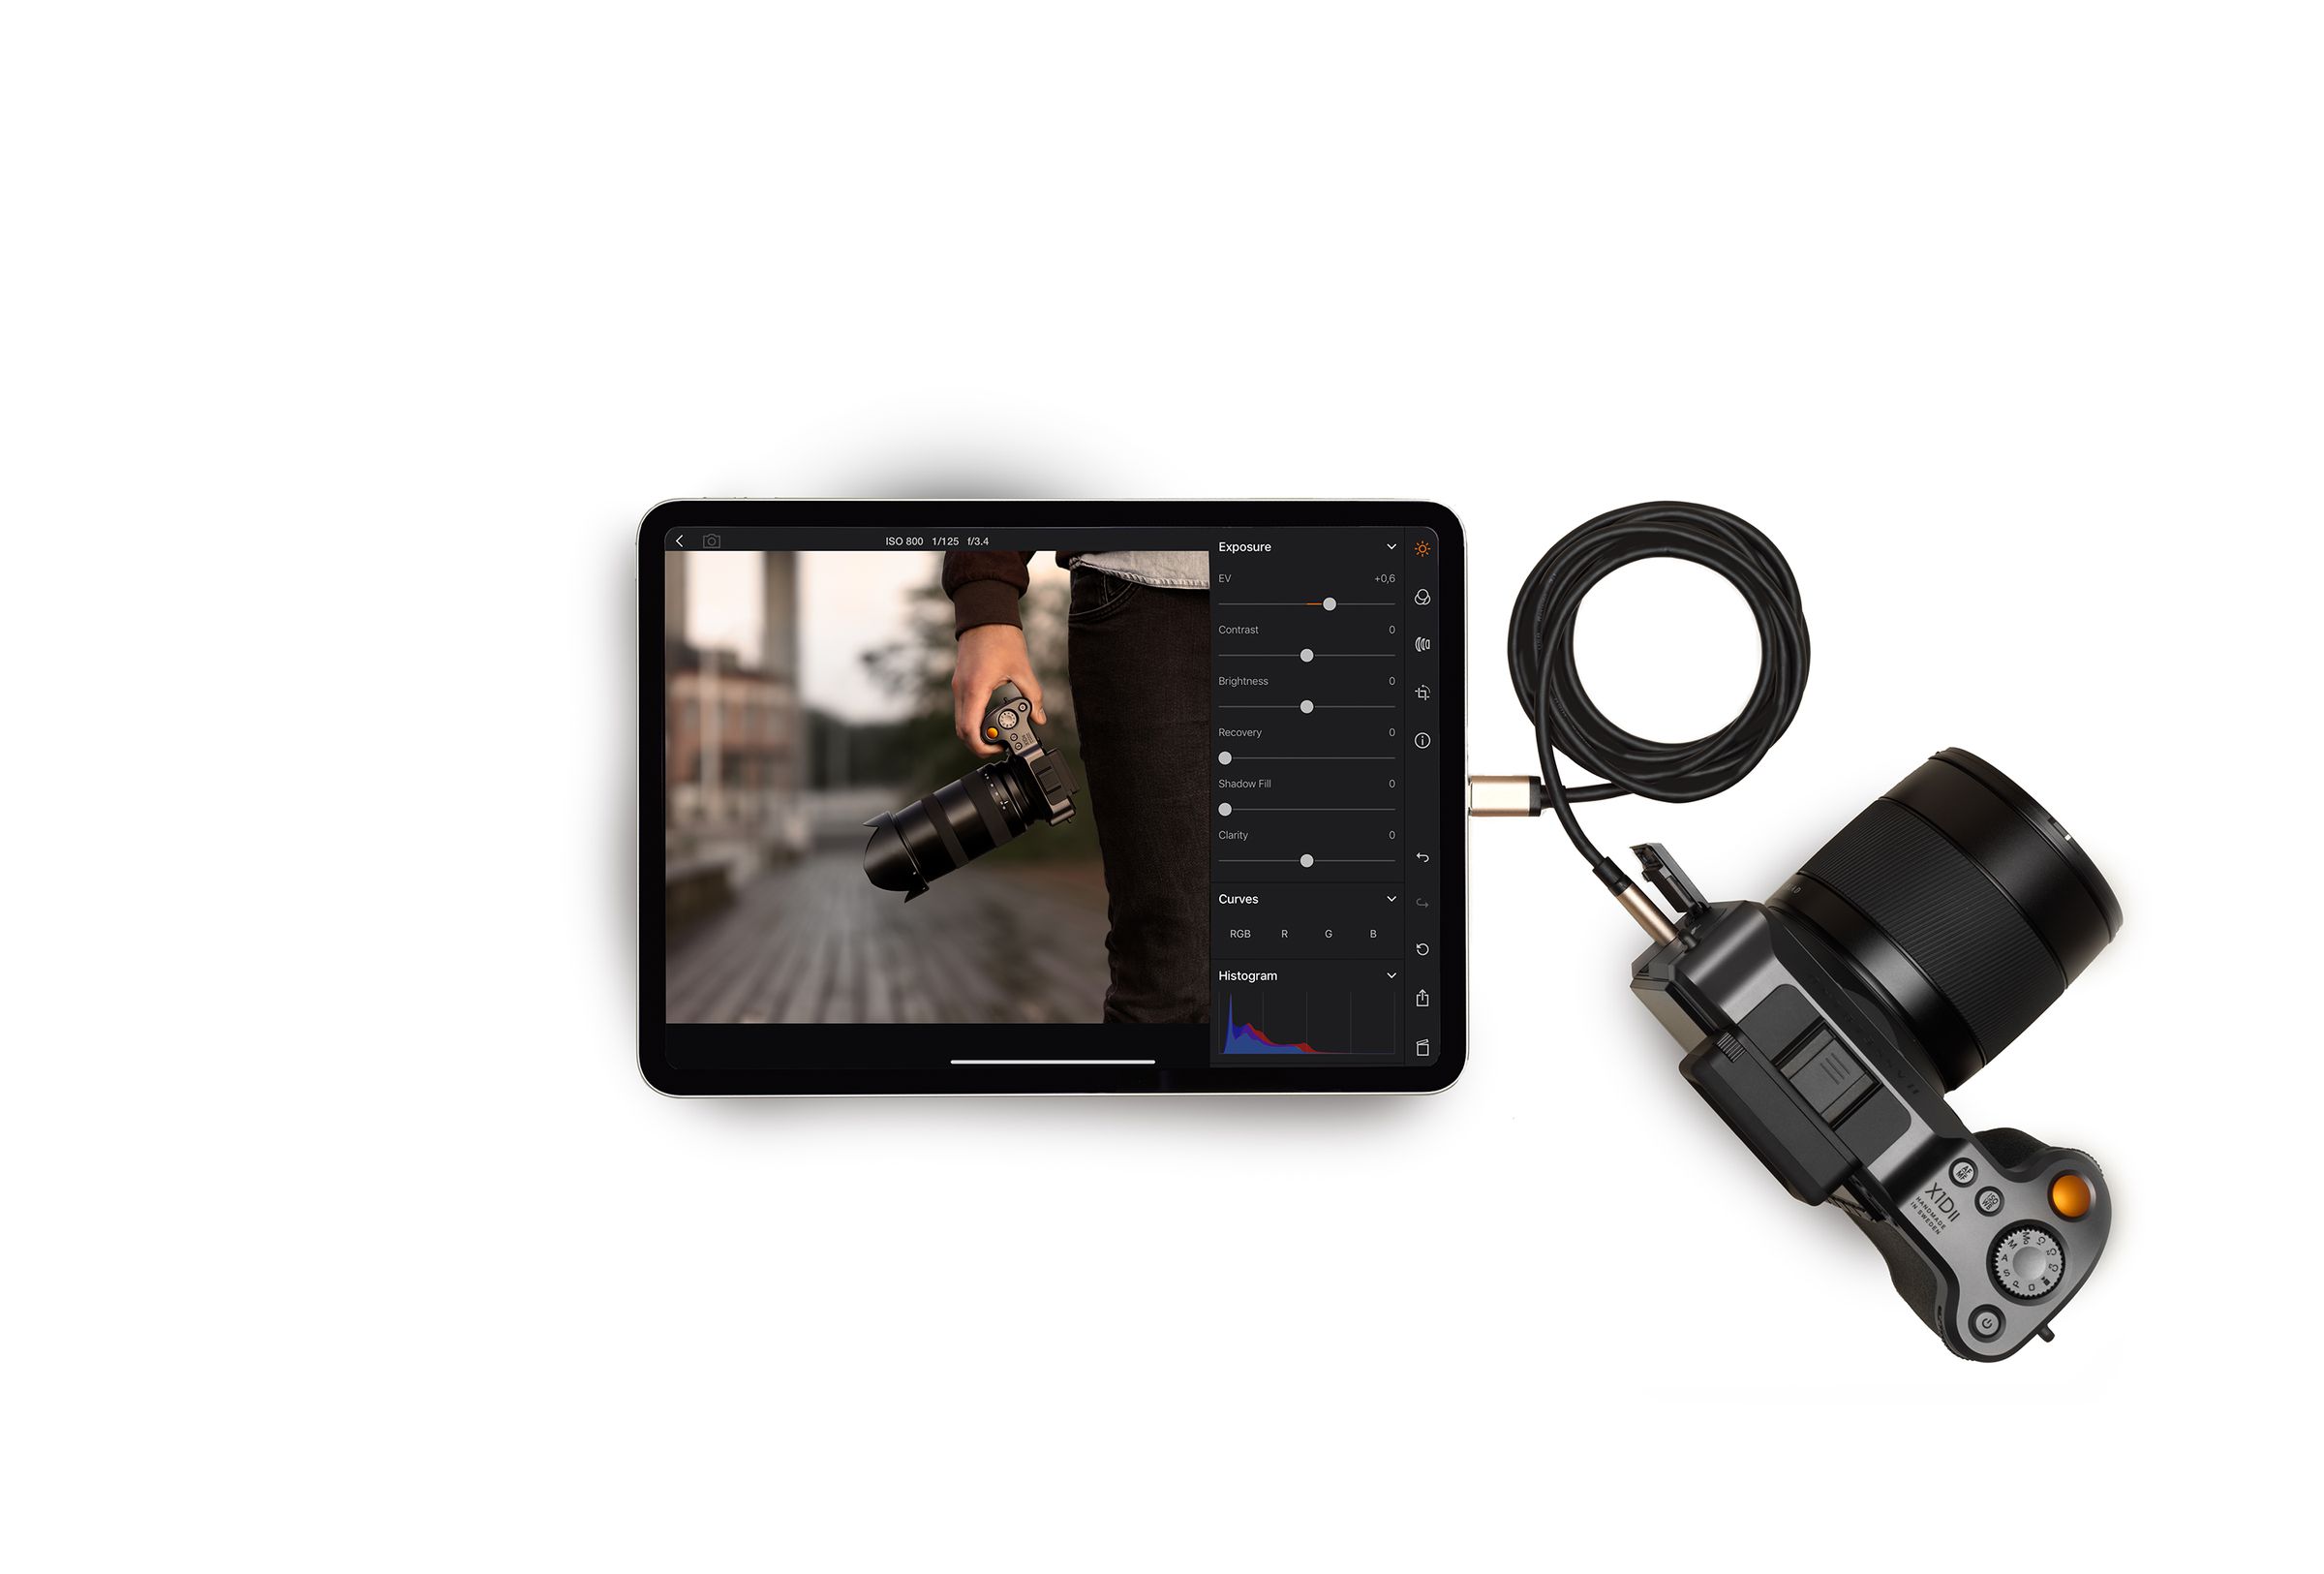 The X1D II is the first medium format camera that can shoot tethered over USB to an iPad